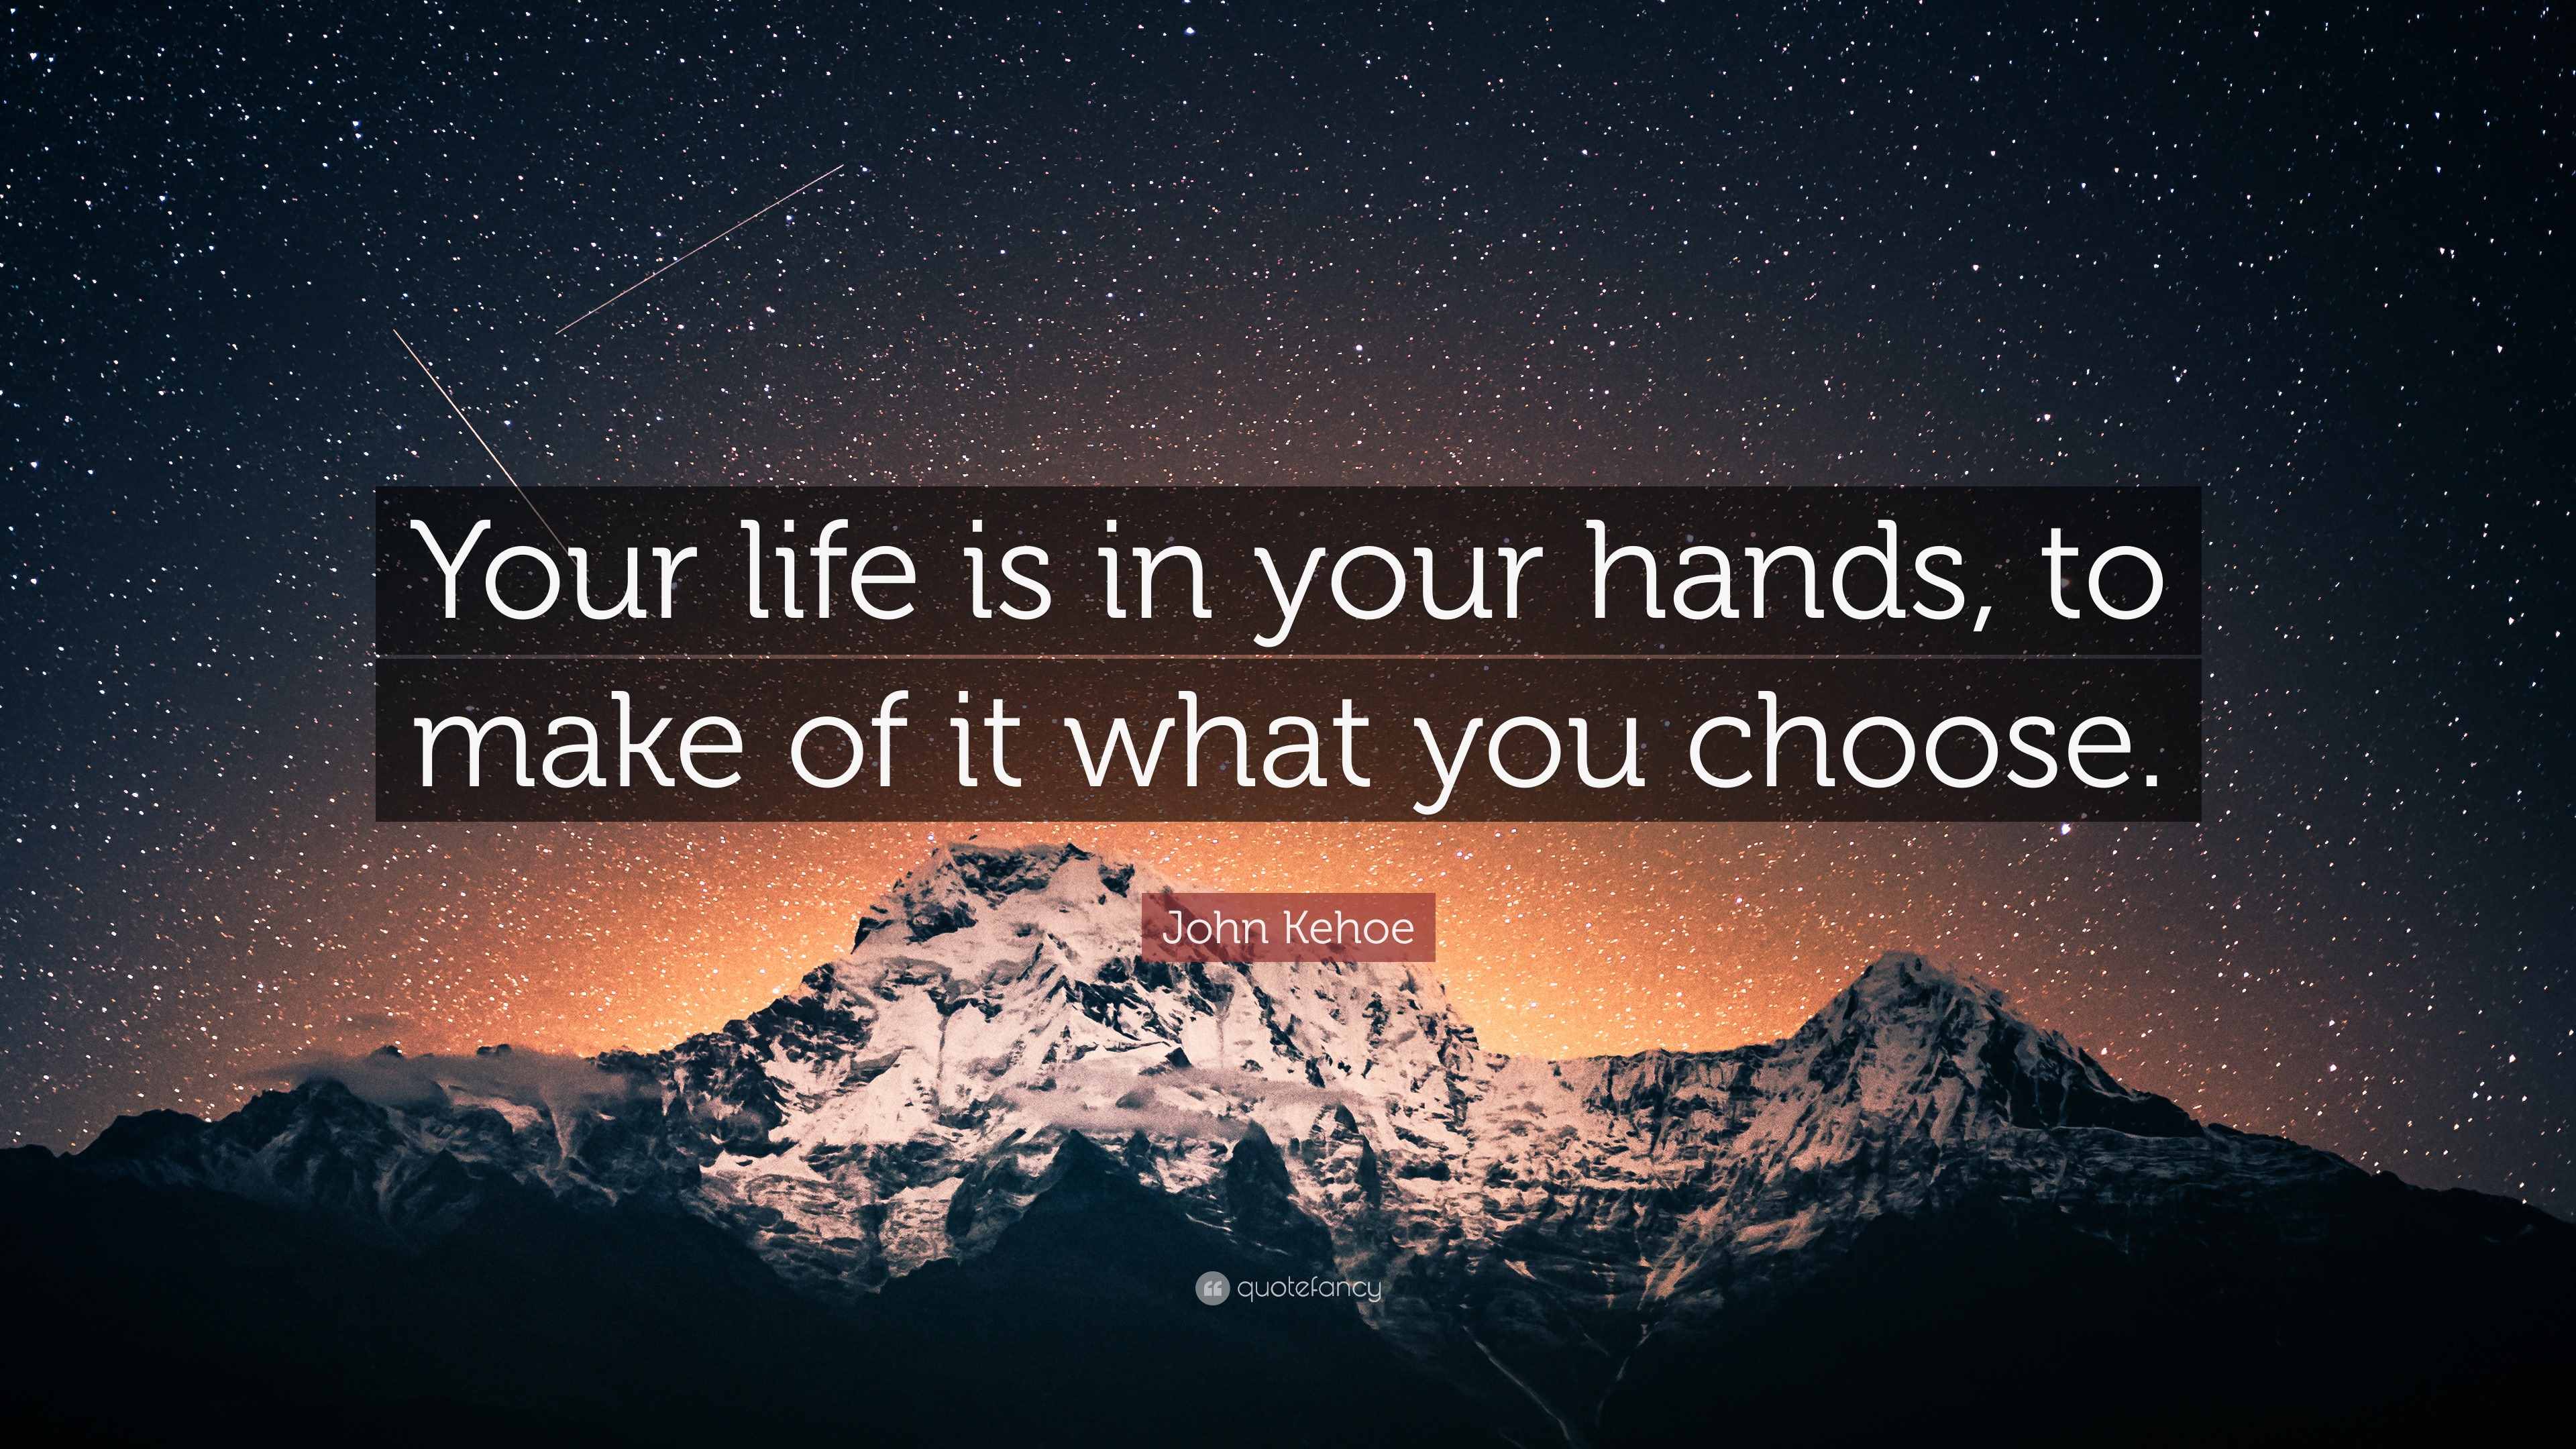 you choose your life quotes john kehoe quote u201cyour life is in your hands to make of it what